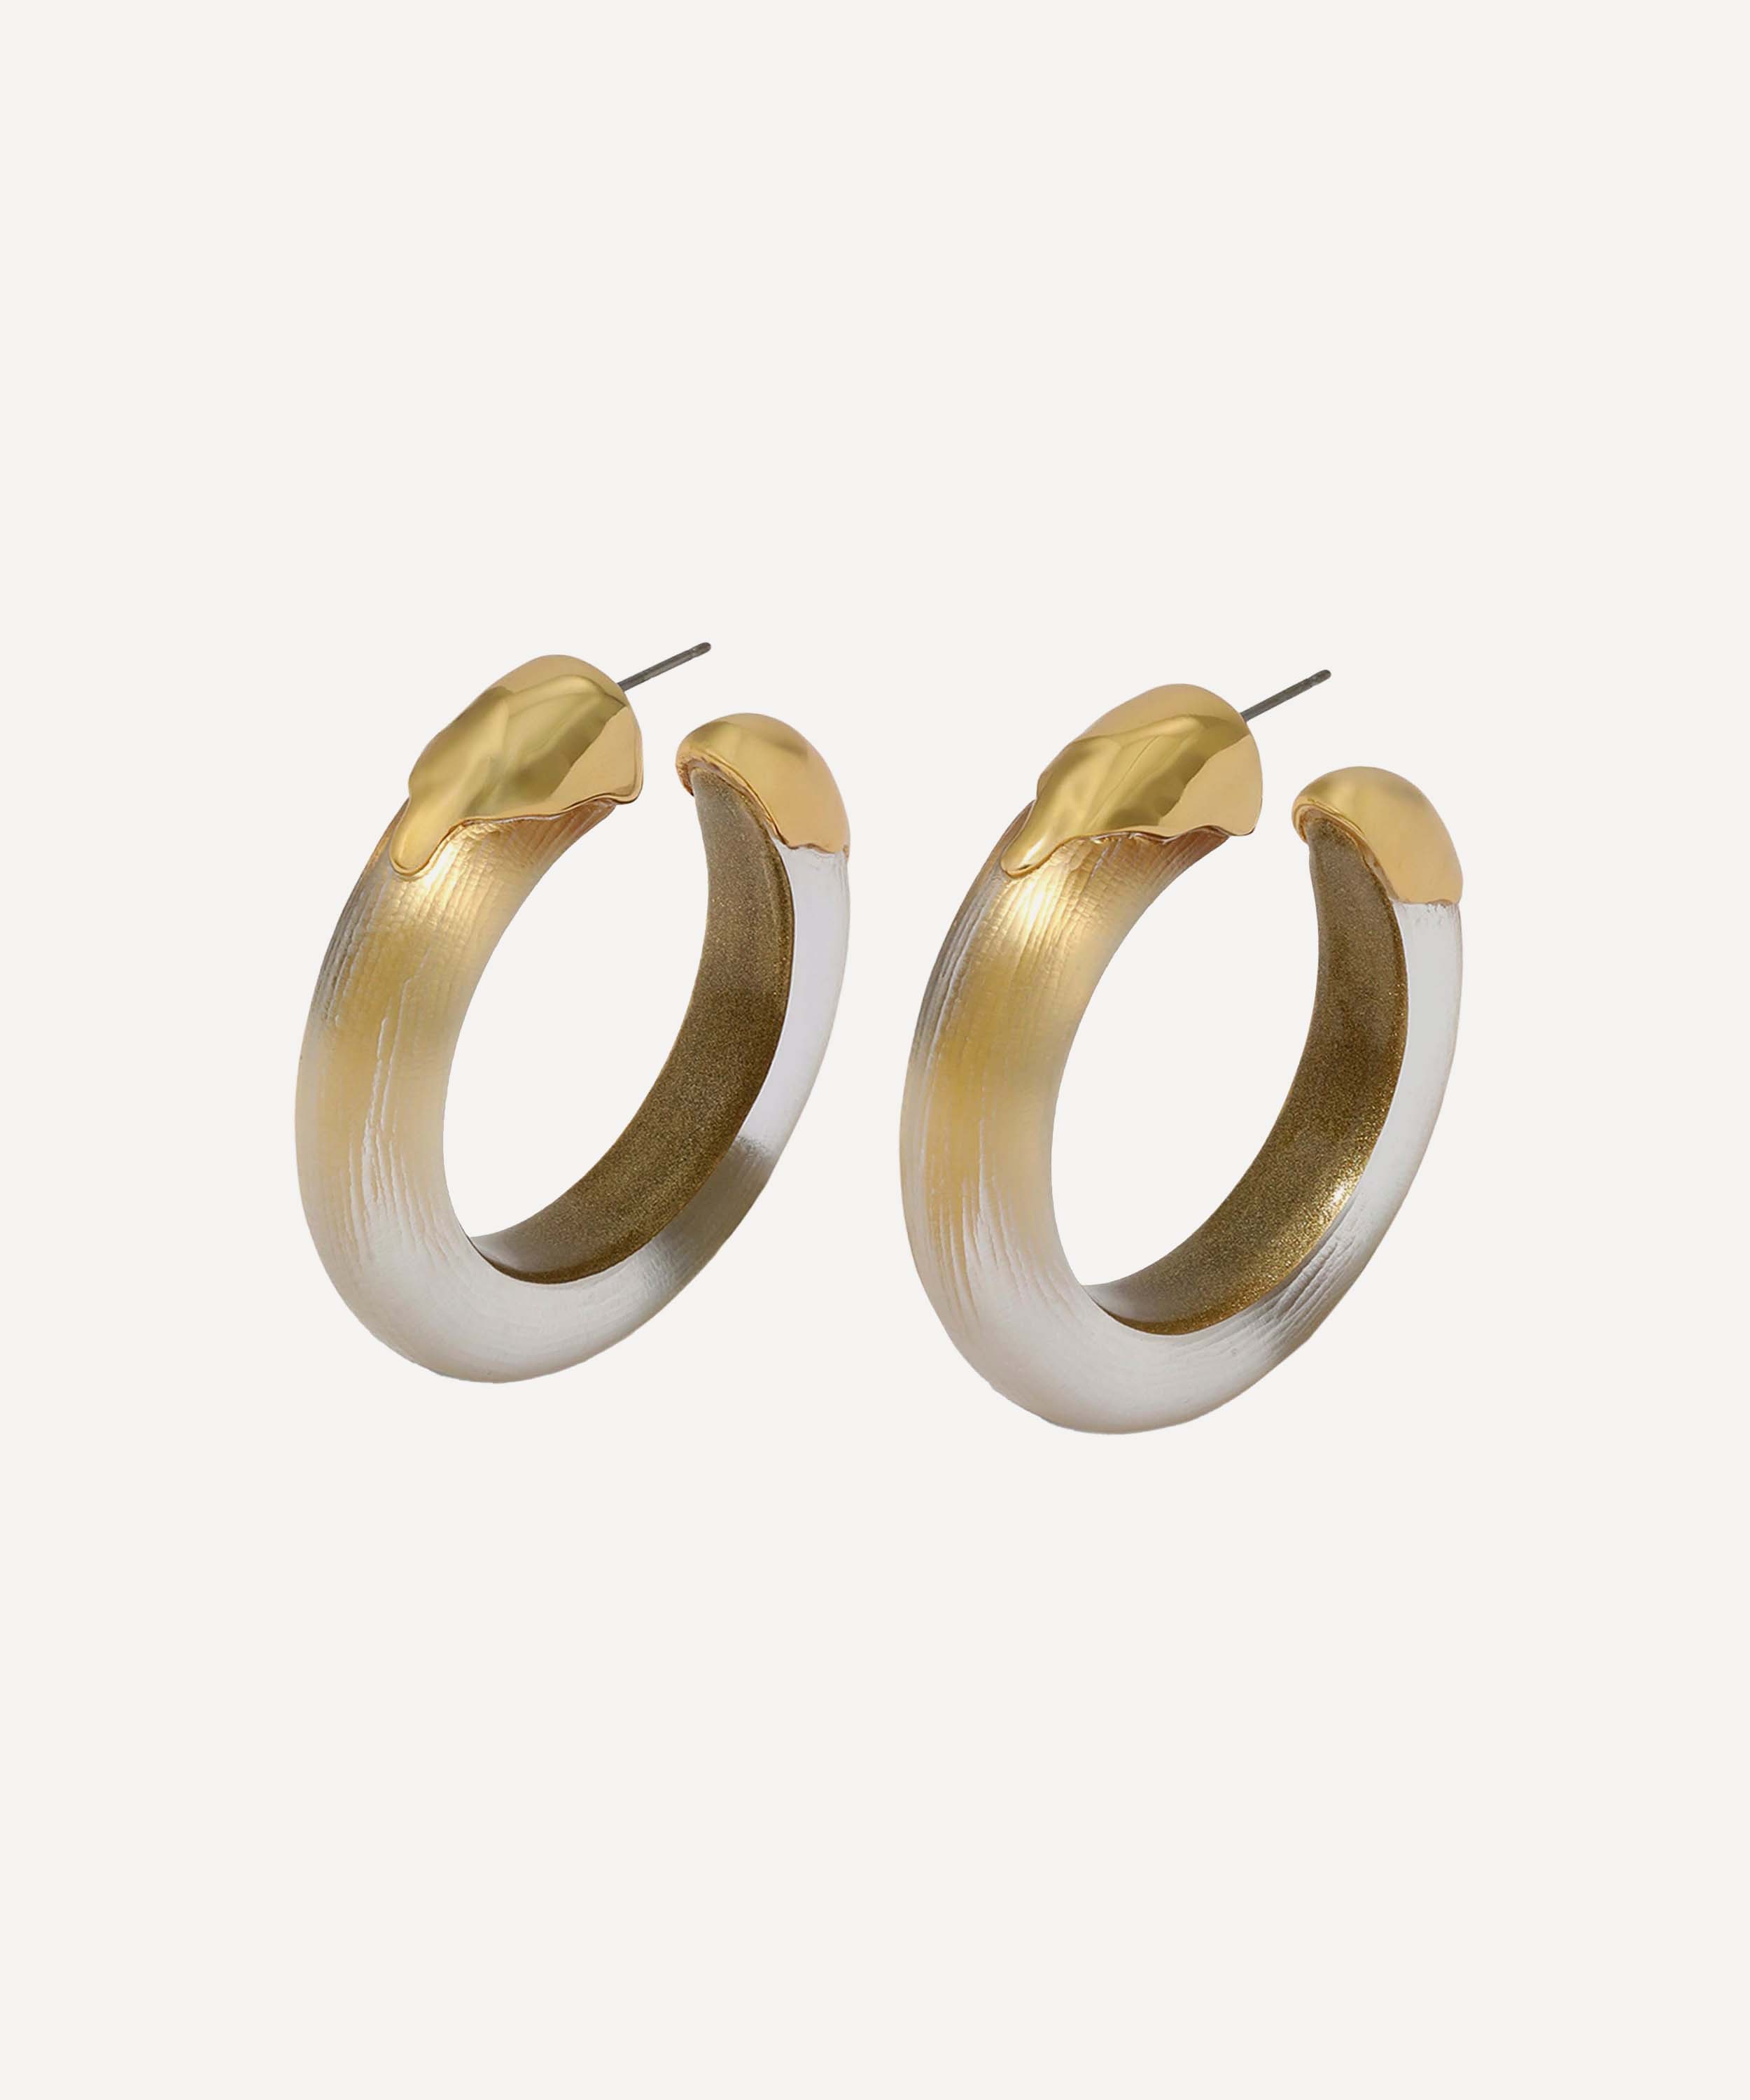 Alexis Bittar - 14ct Gold-Plated Luminous Lucite Hoop Earrings image number 0